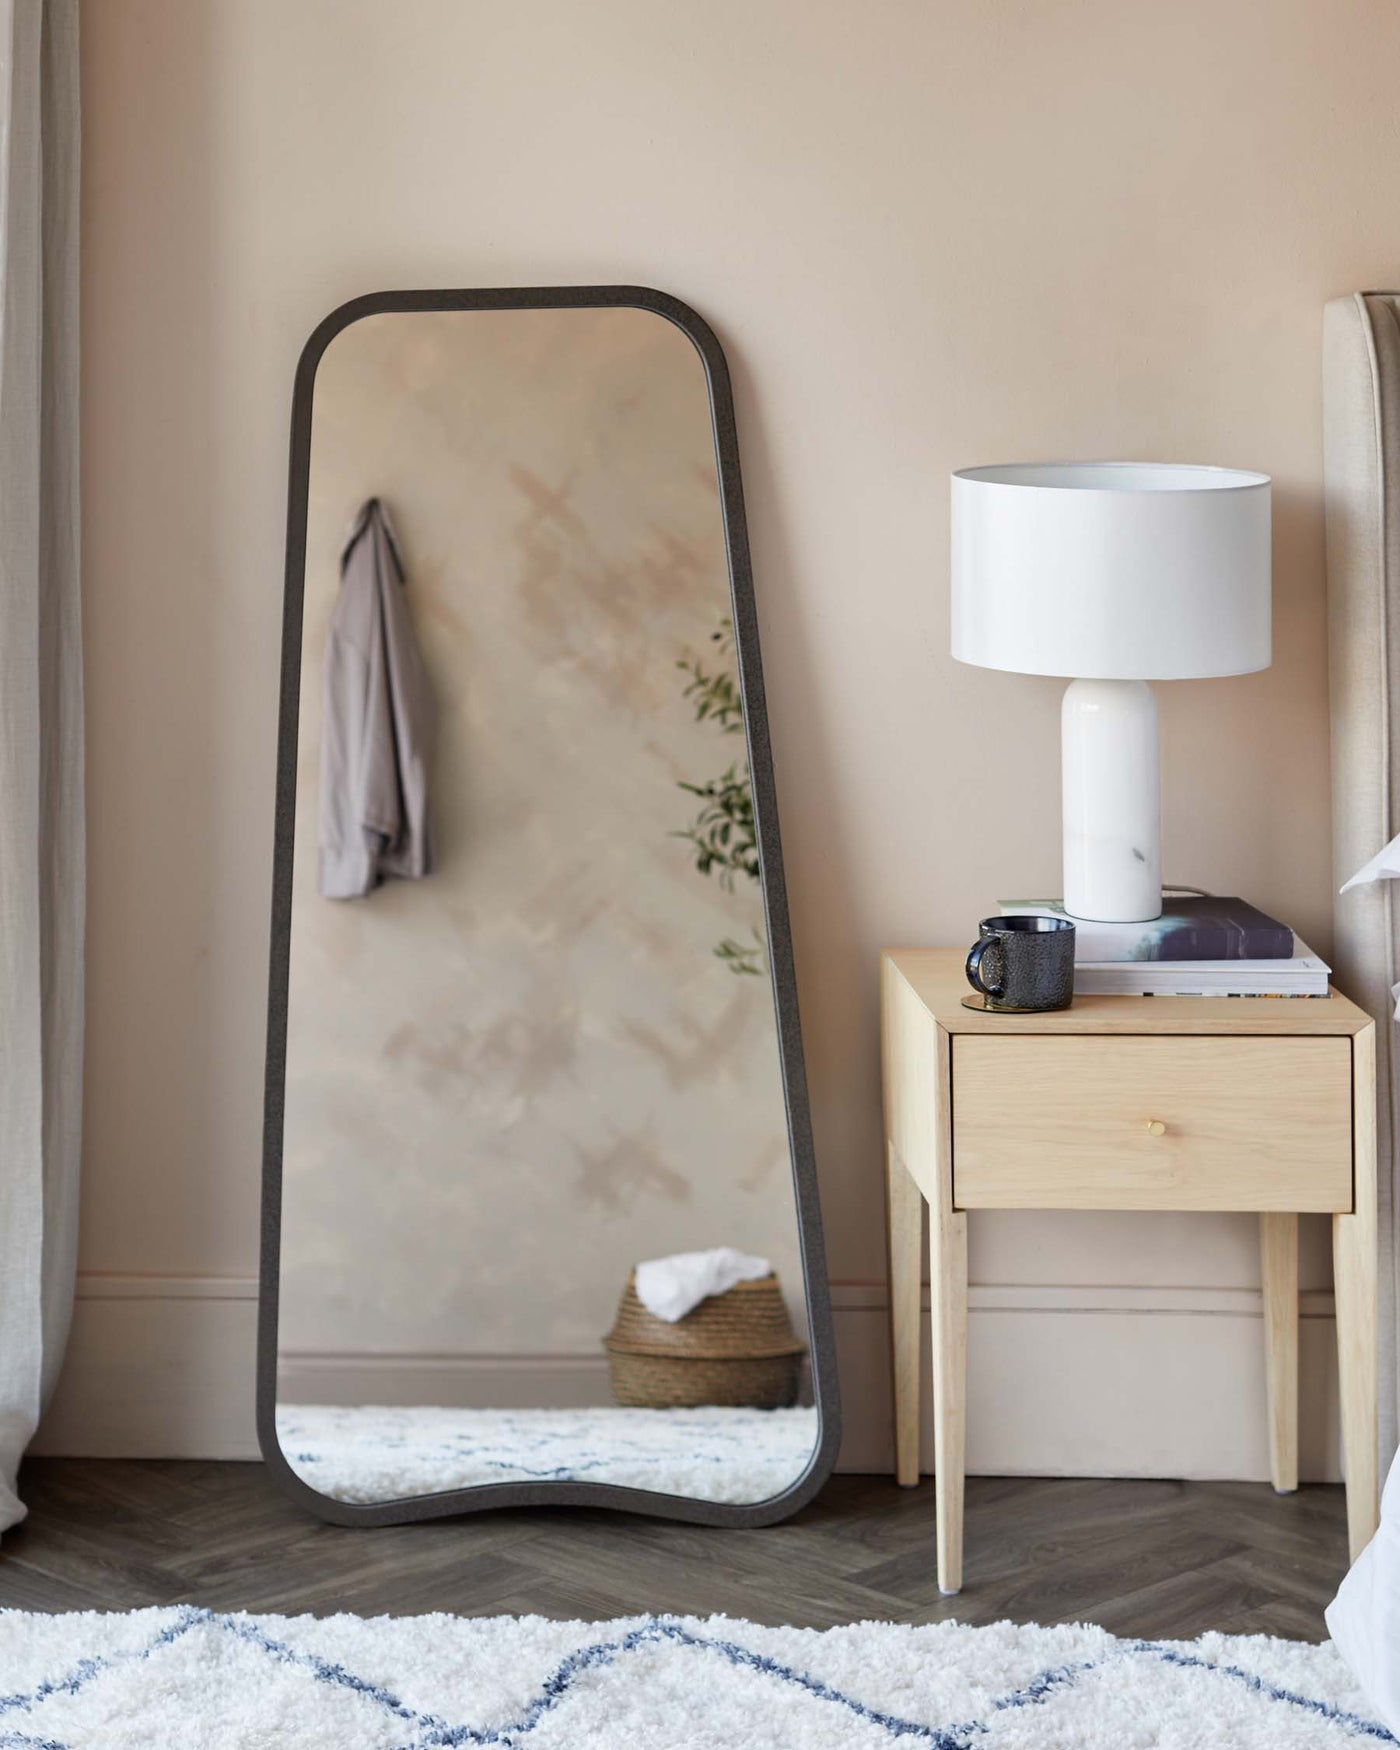 A large freestanding floor mirror with a sleek, curved metal frame, and a minimalist natural wood bedside table with a single drawer and splayed legs, accompanied by a modern white table lamp with a cylindrical marble base.